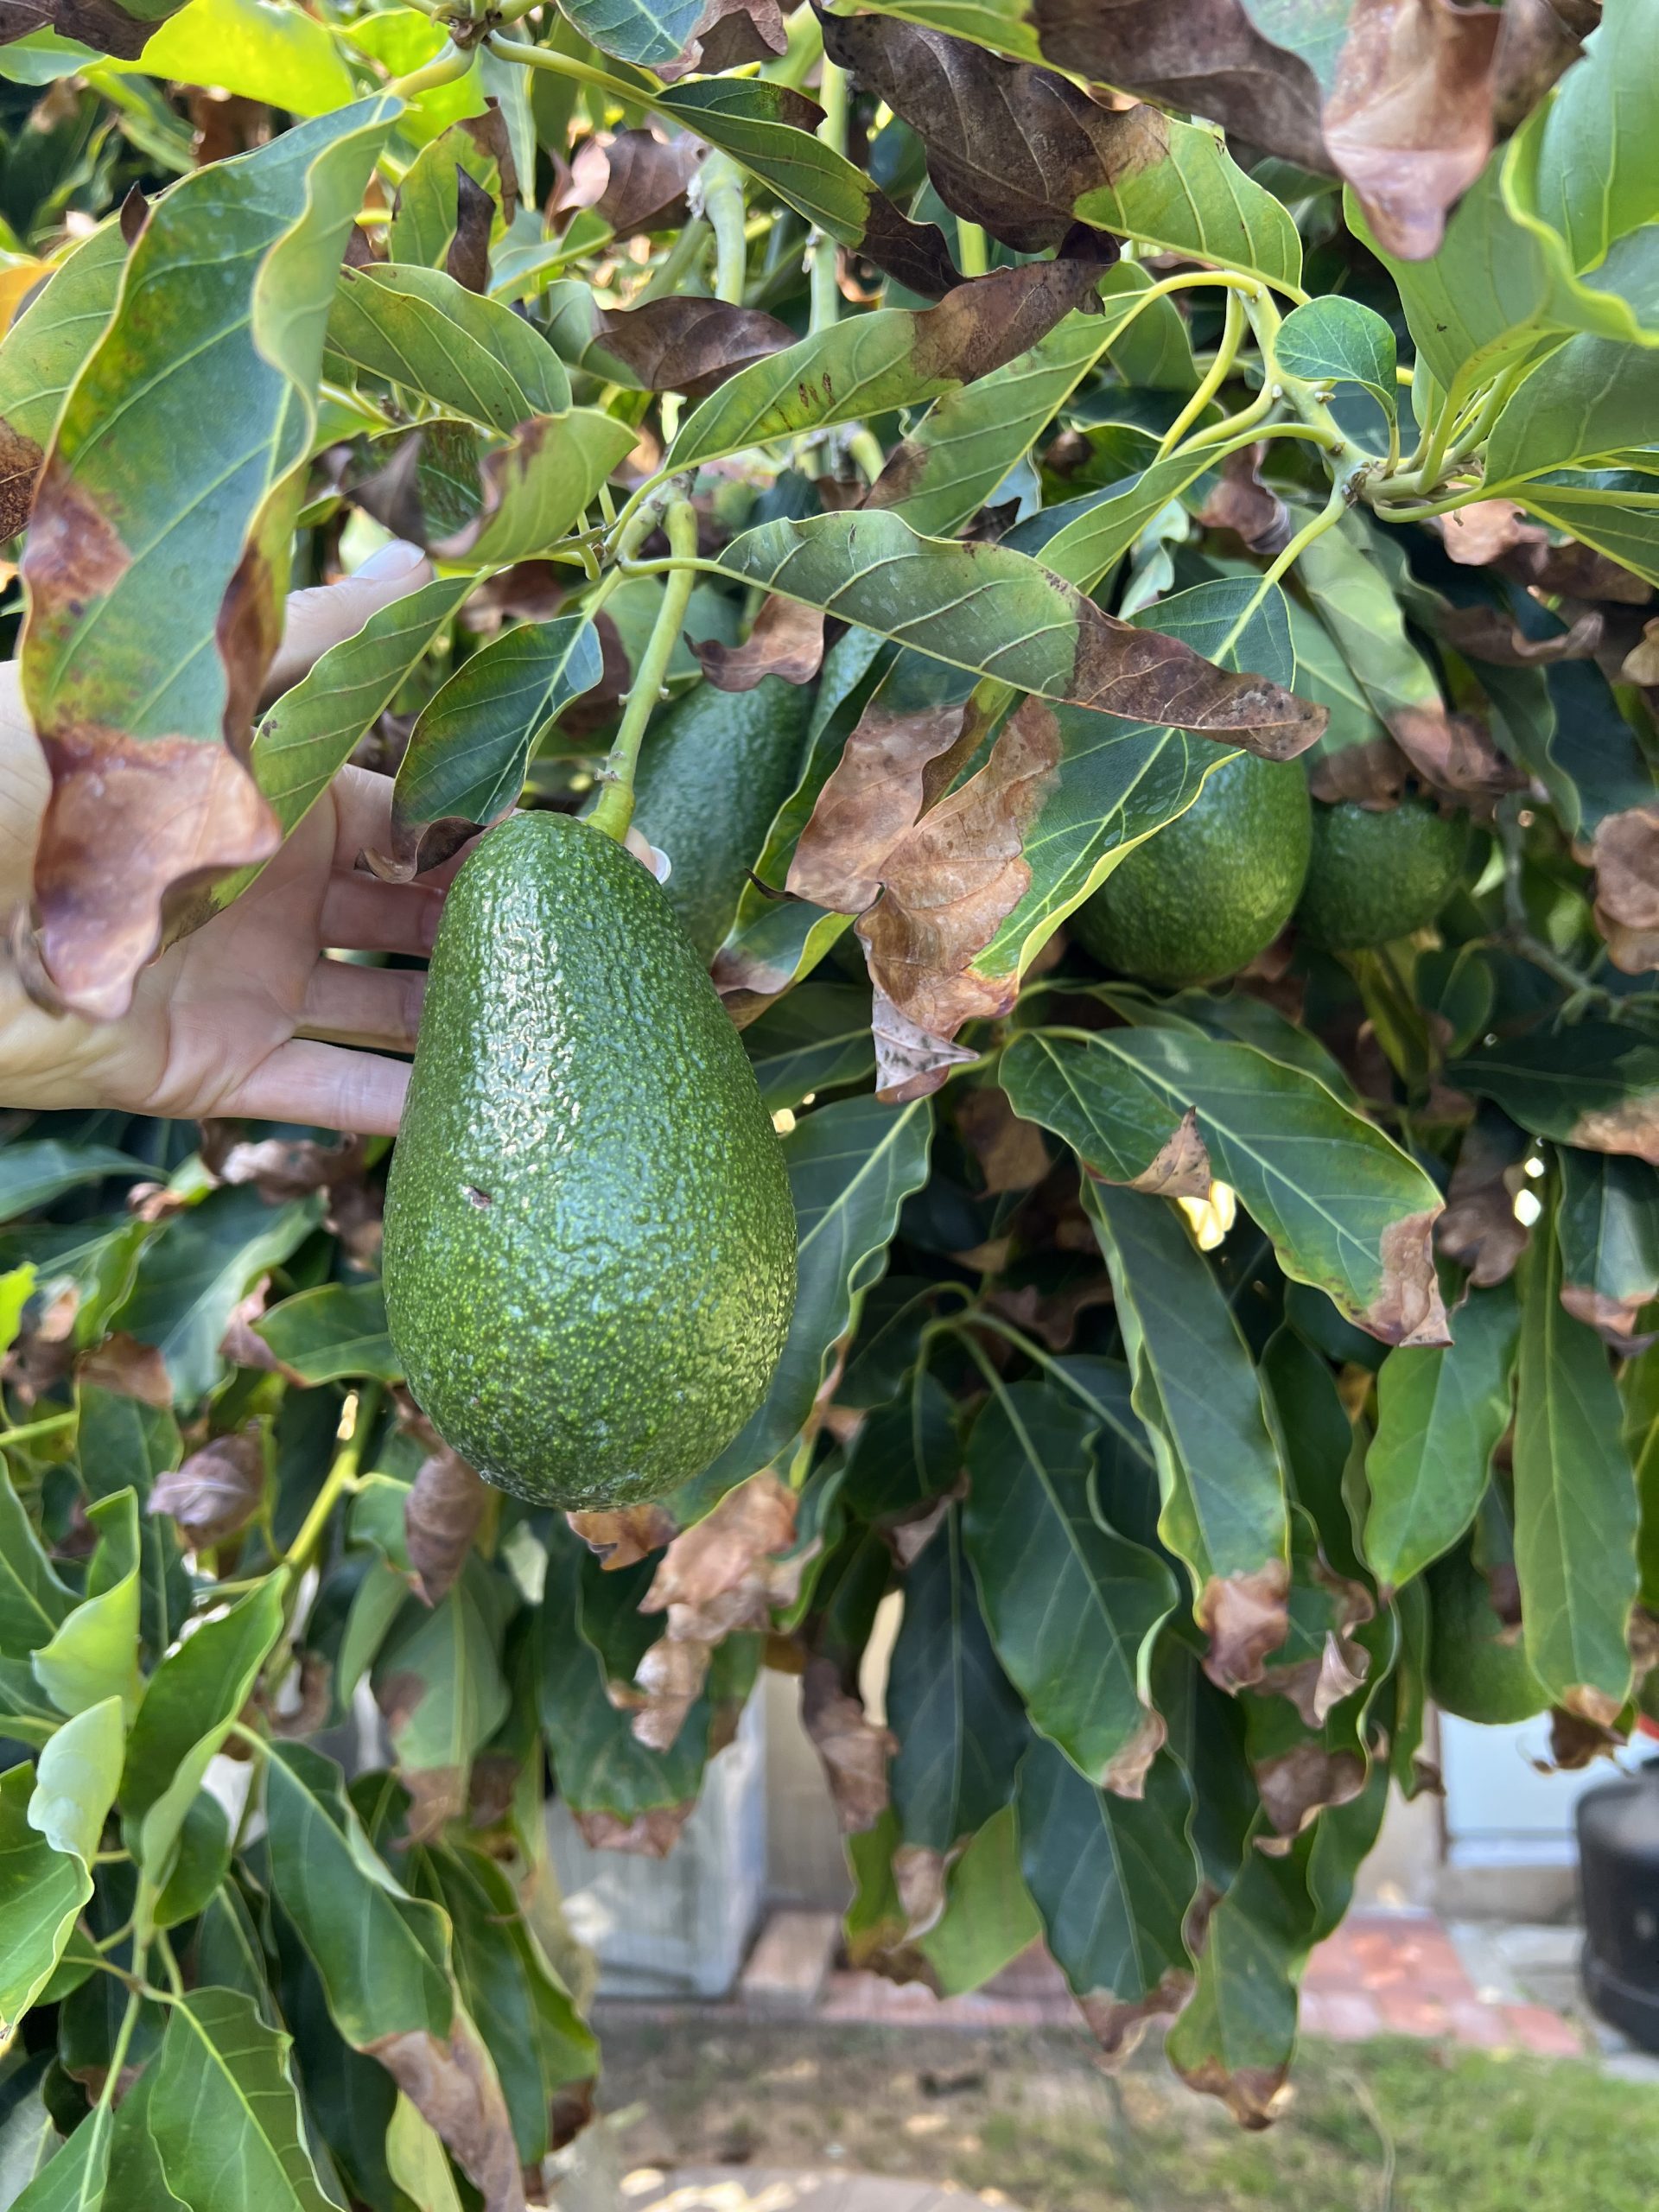 My First Time Picking An Avocado!